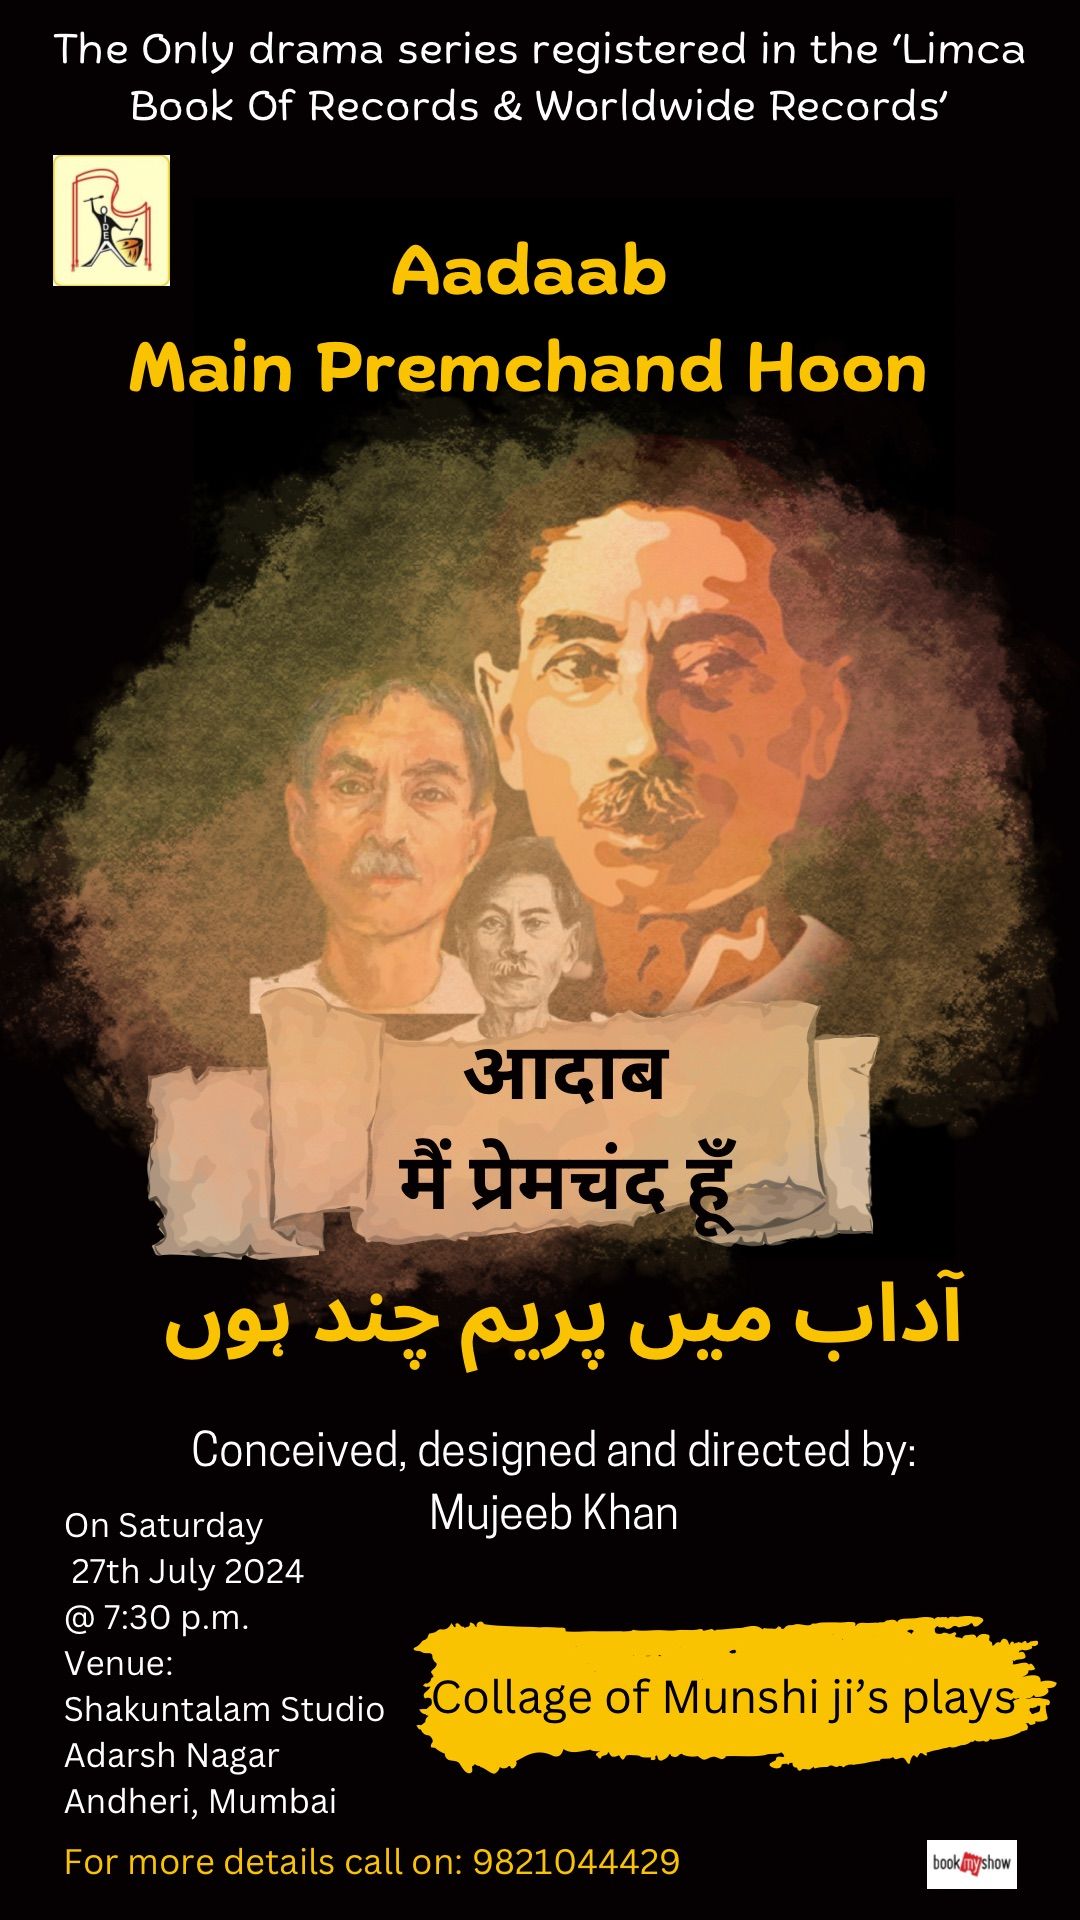 Aadaab Main Premchand Hoon (The only drama series registered in the two world records) 